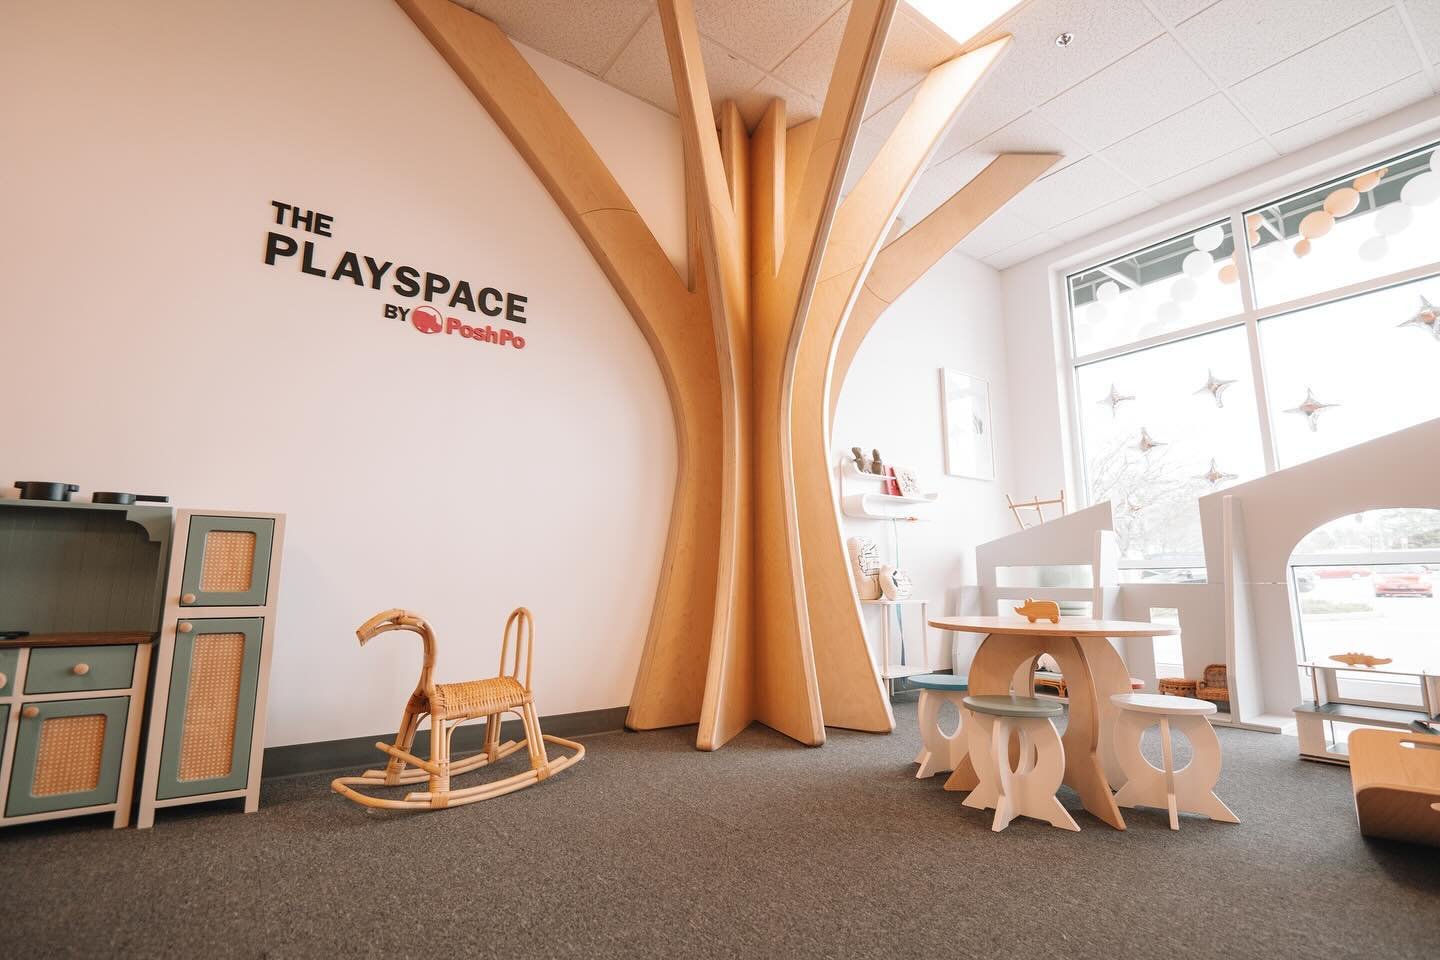 The Playspace by @_poshpo at @designlifekids turned out magical ✨

From the finished Play Kitchen to the tree &mdash; we are super proud to have been apart of this project. Make sure to check them out! 

#woodentree #woodencreations #woodworker #wood